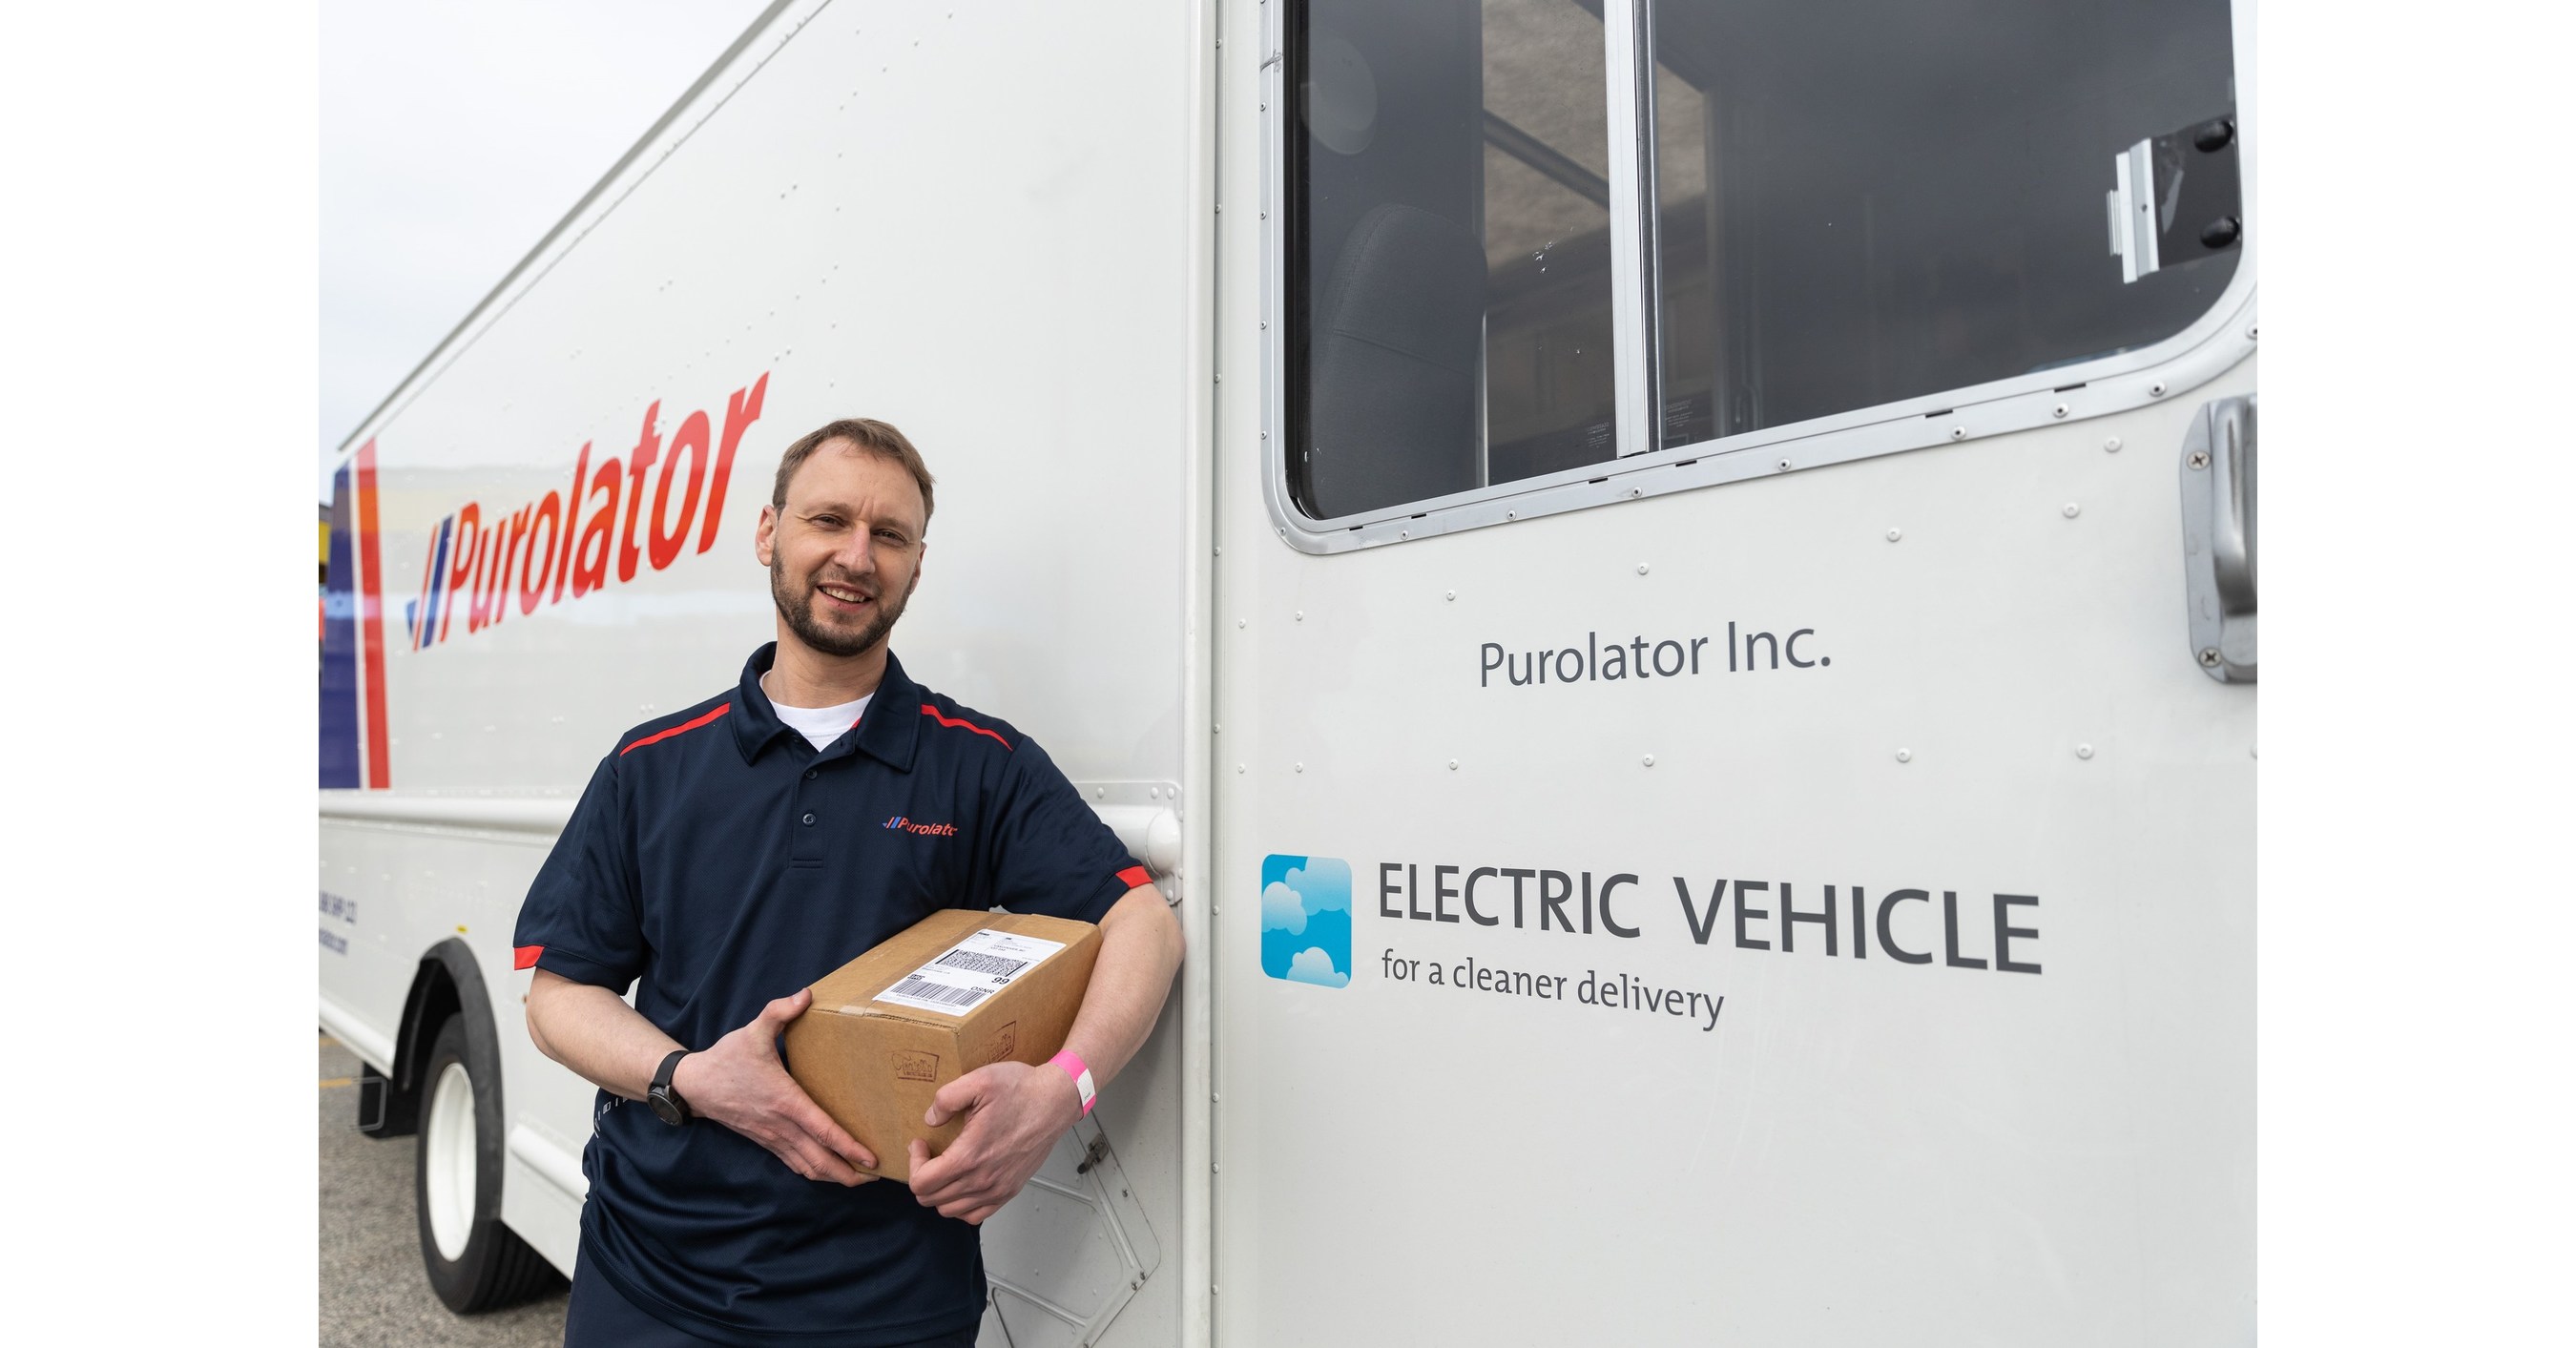 Purolator hits the road as first national courier to deploy fully